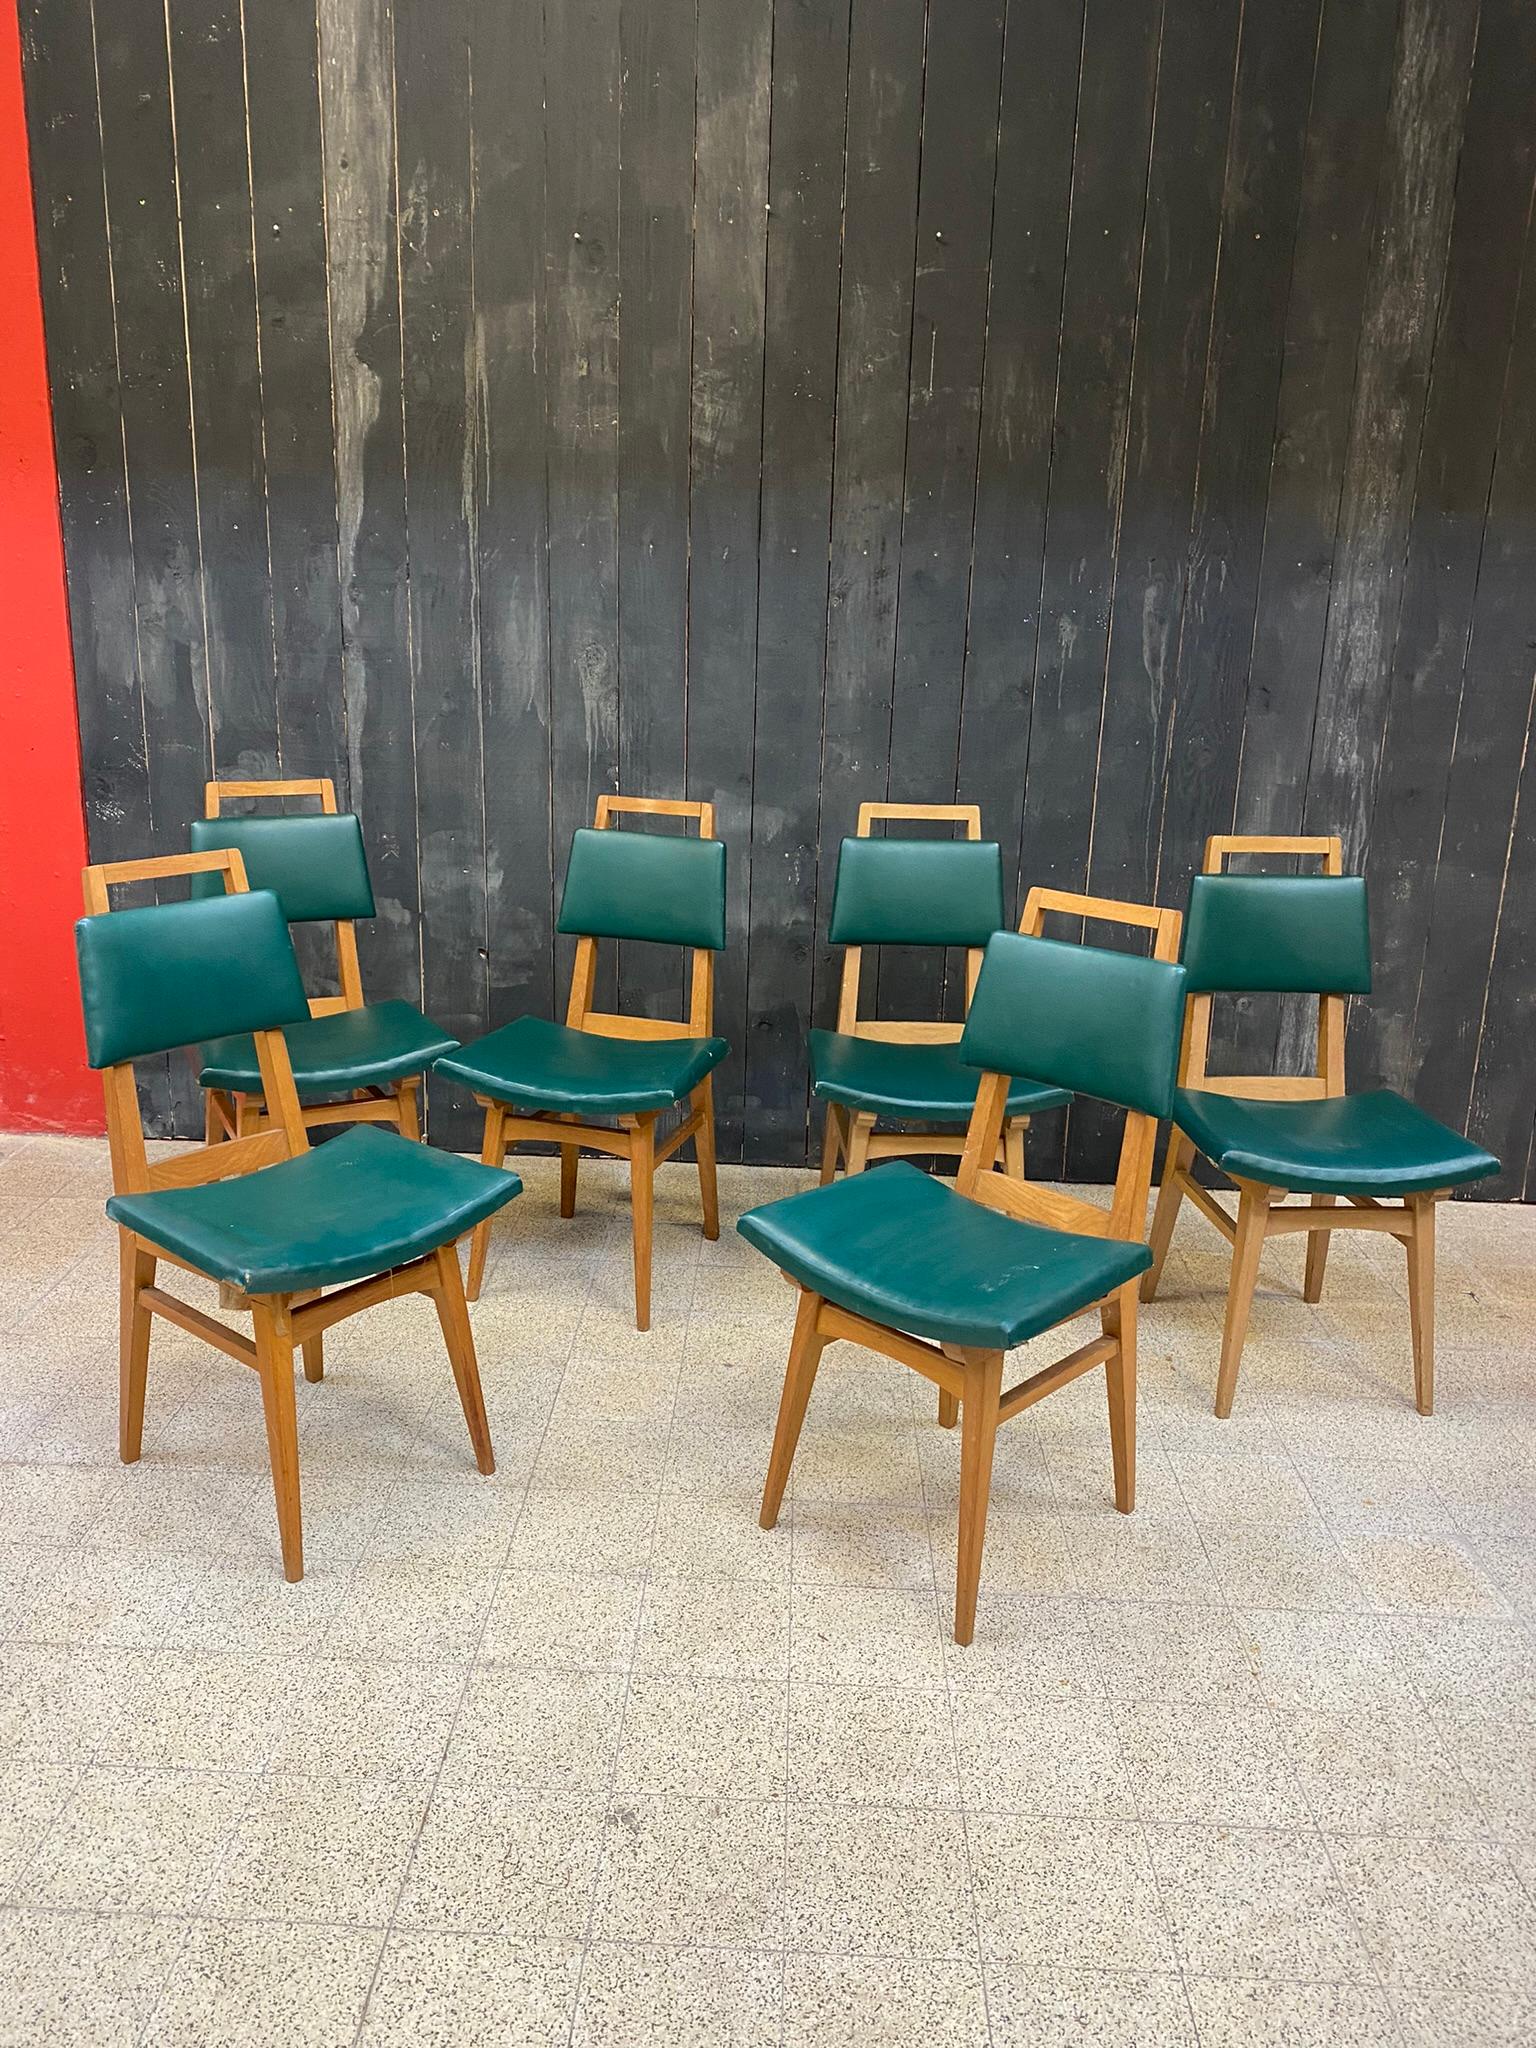 Suite of 6 oak chairs, circa 1950.
Good general condition, but chairs to be glued and upholstery to be changed.